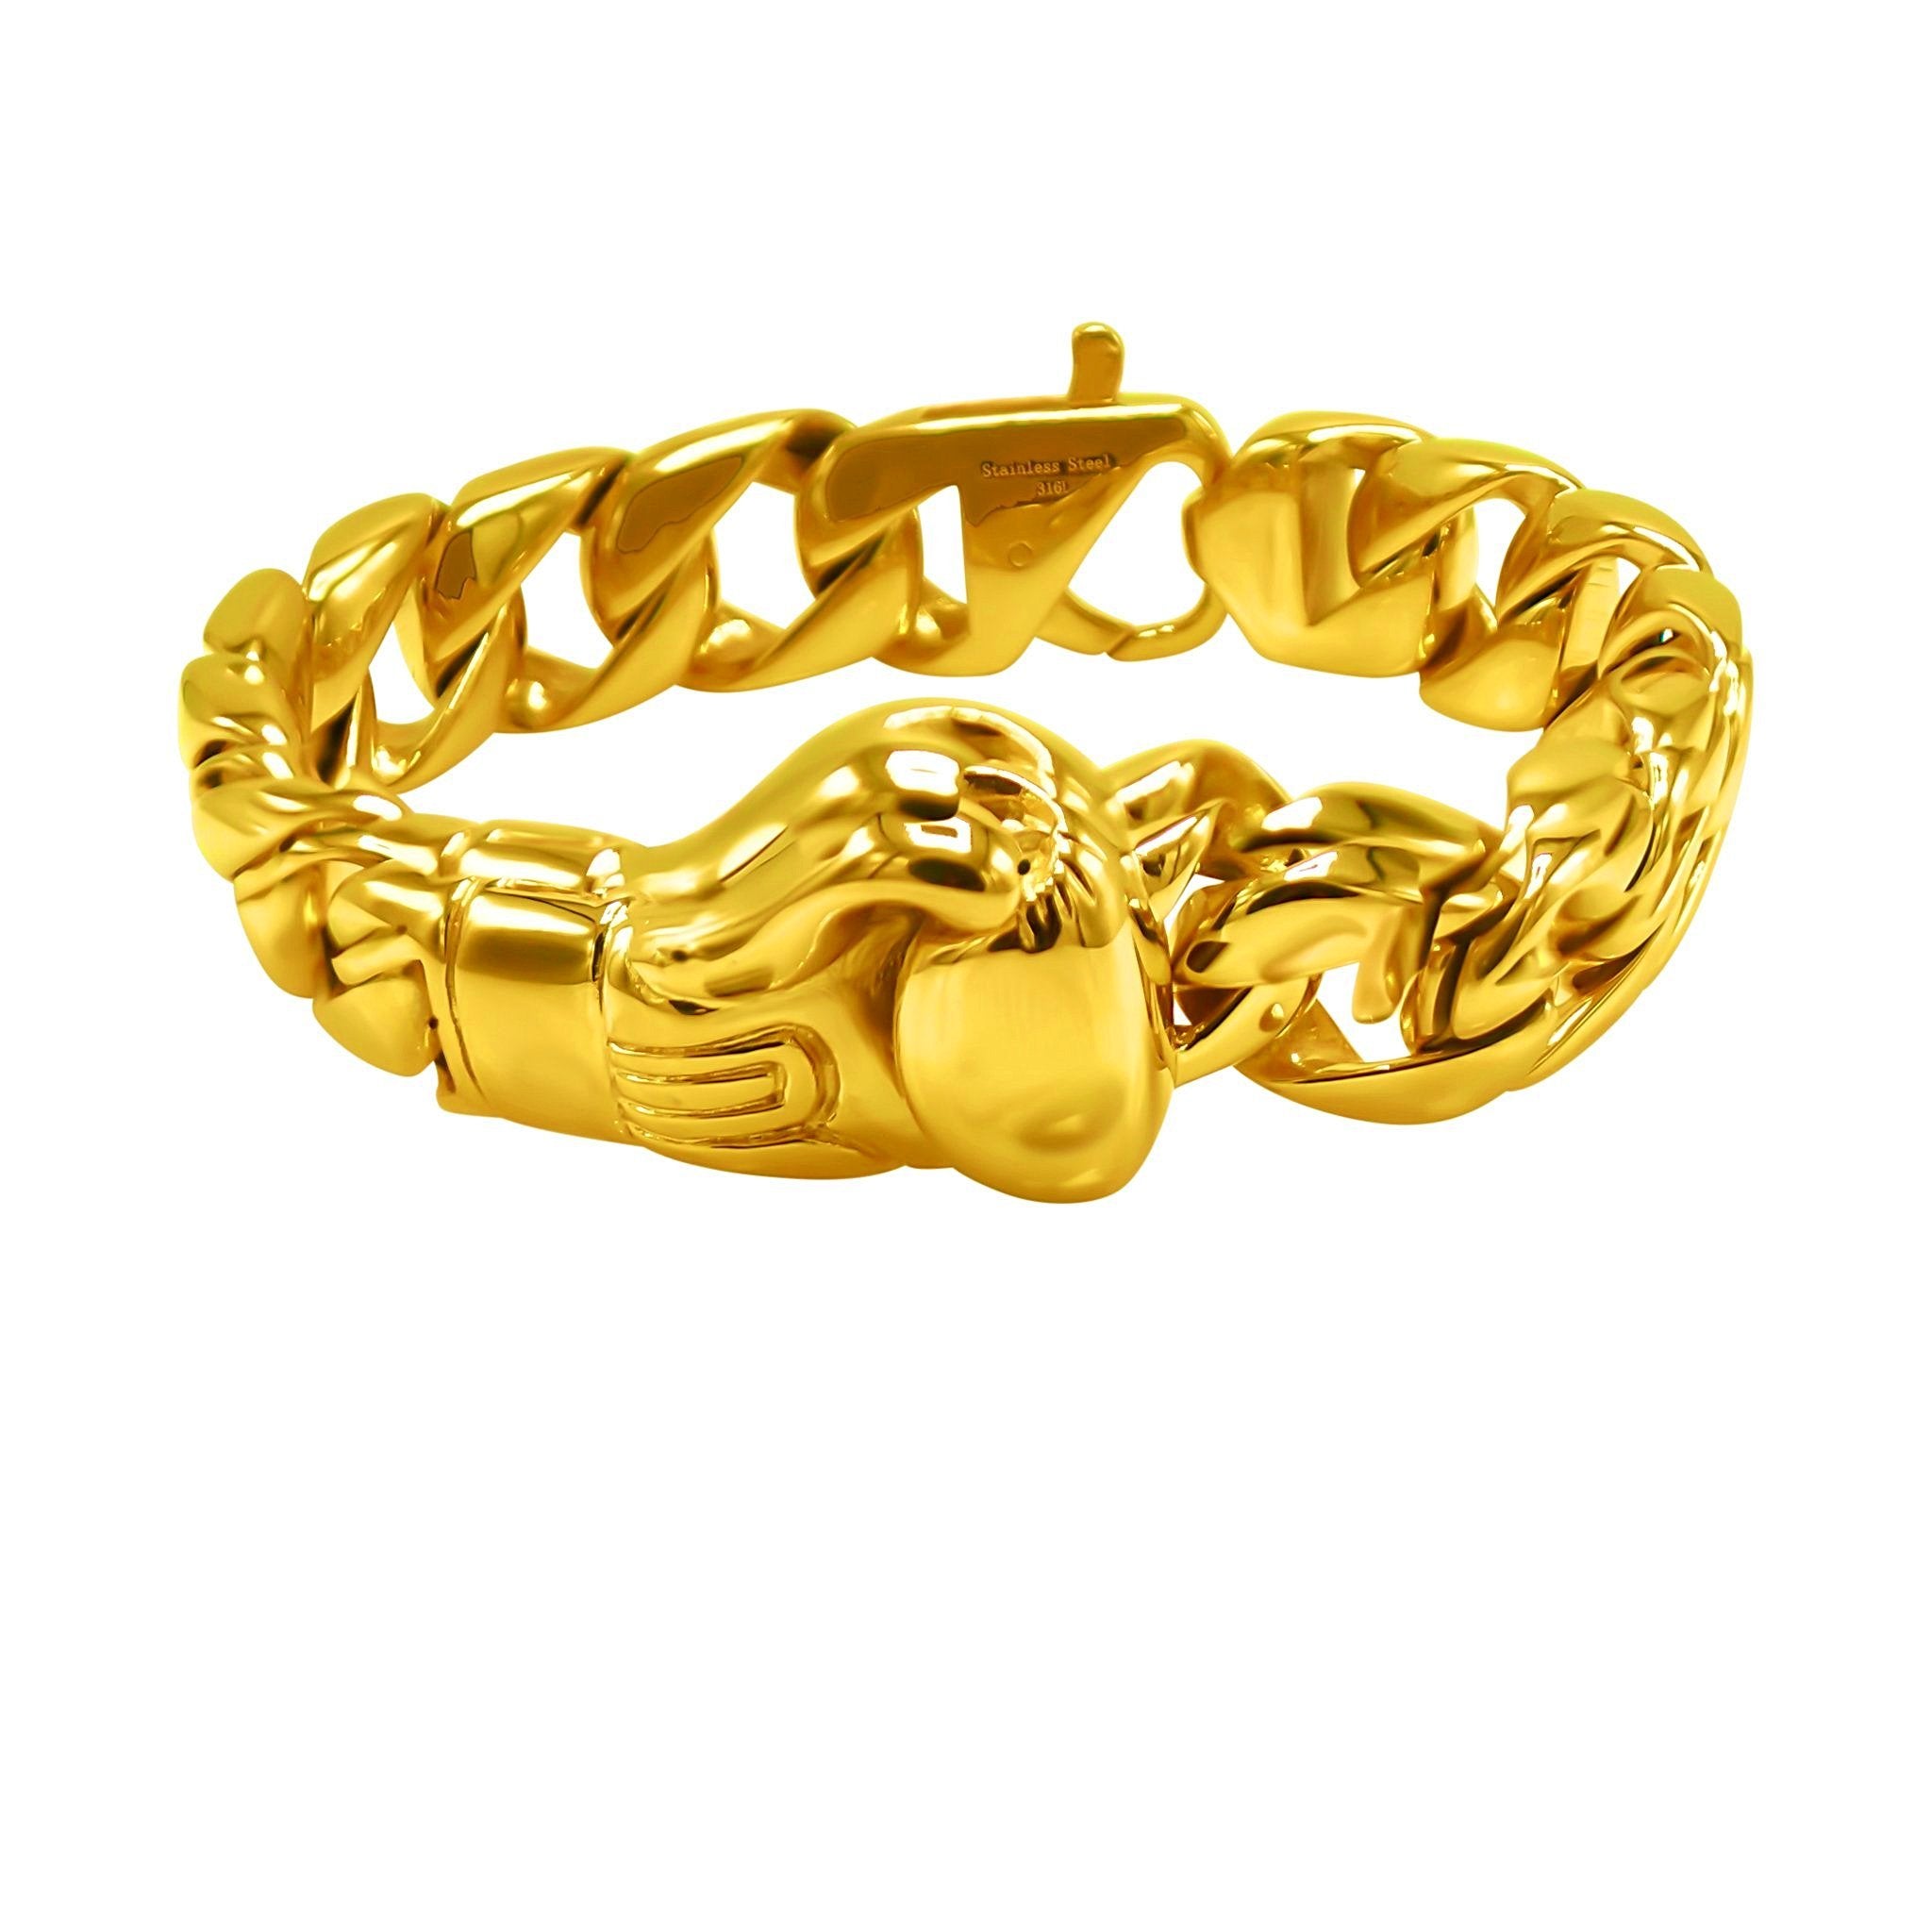 Stainess Steel Glove Bracelet in Gold Color